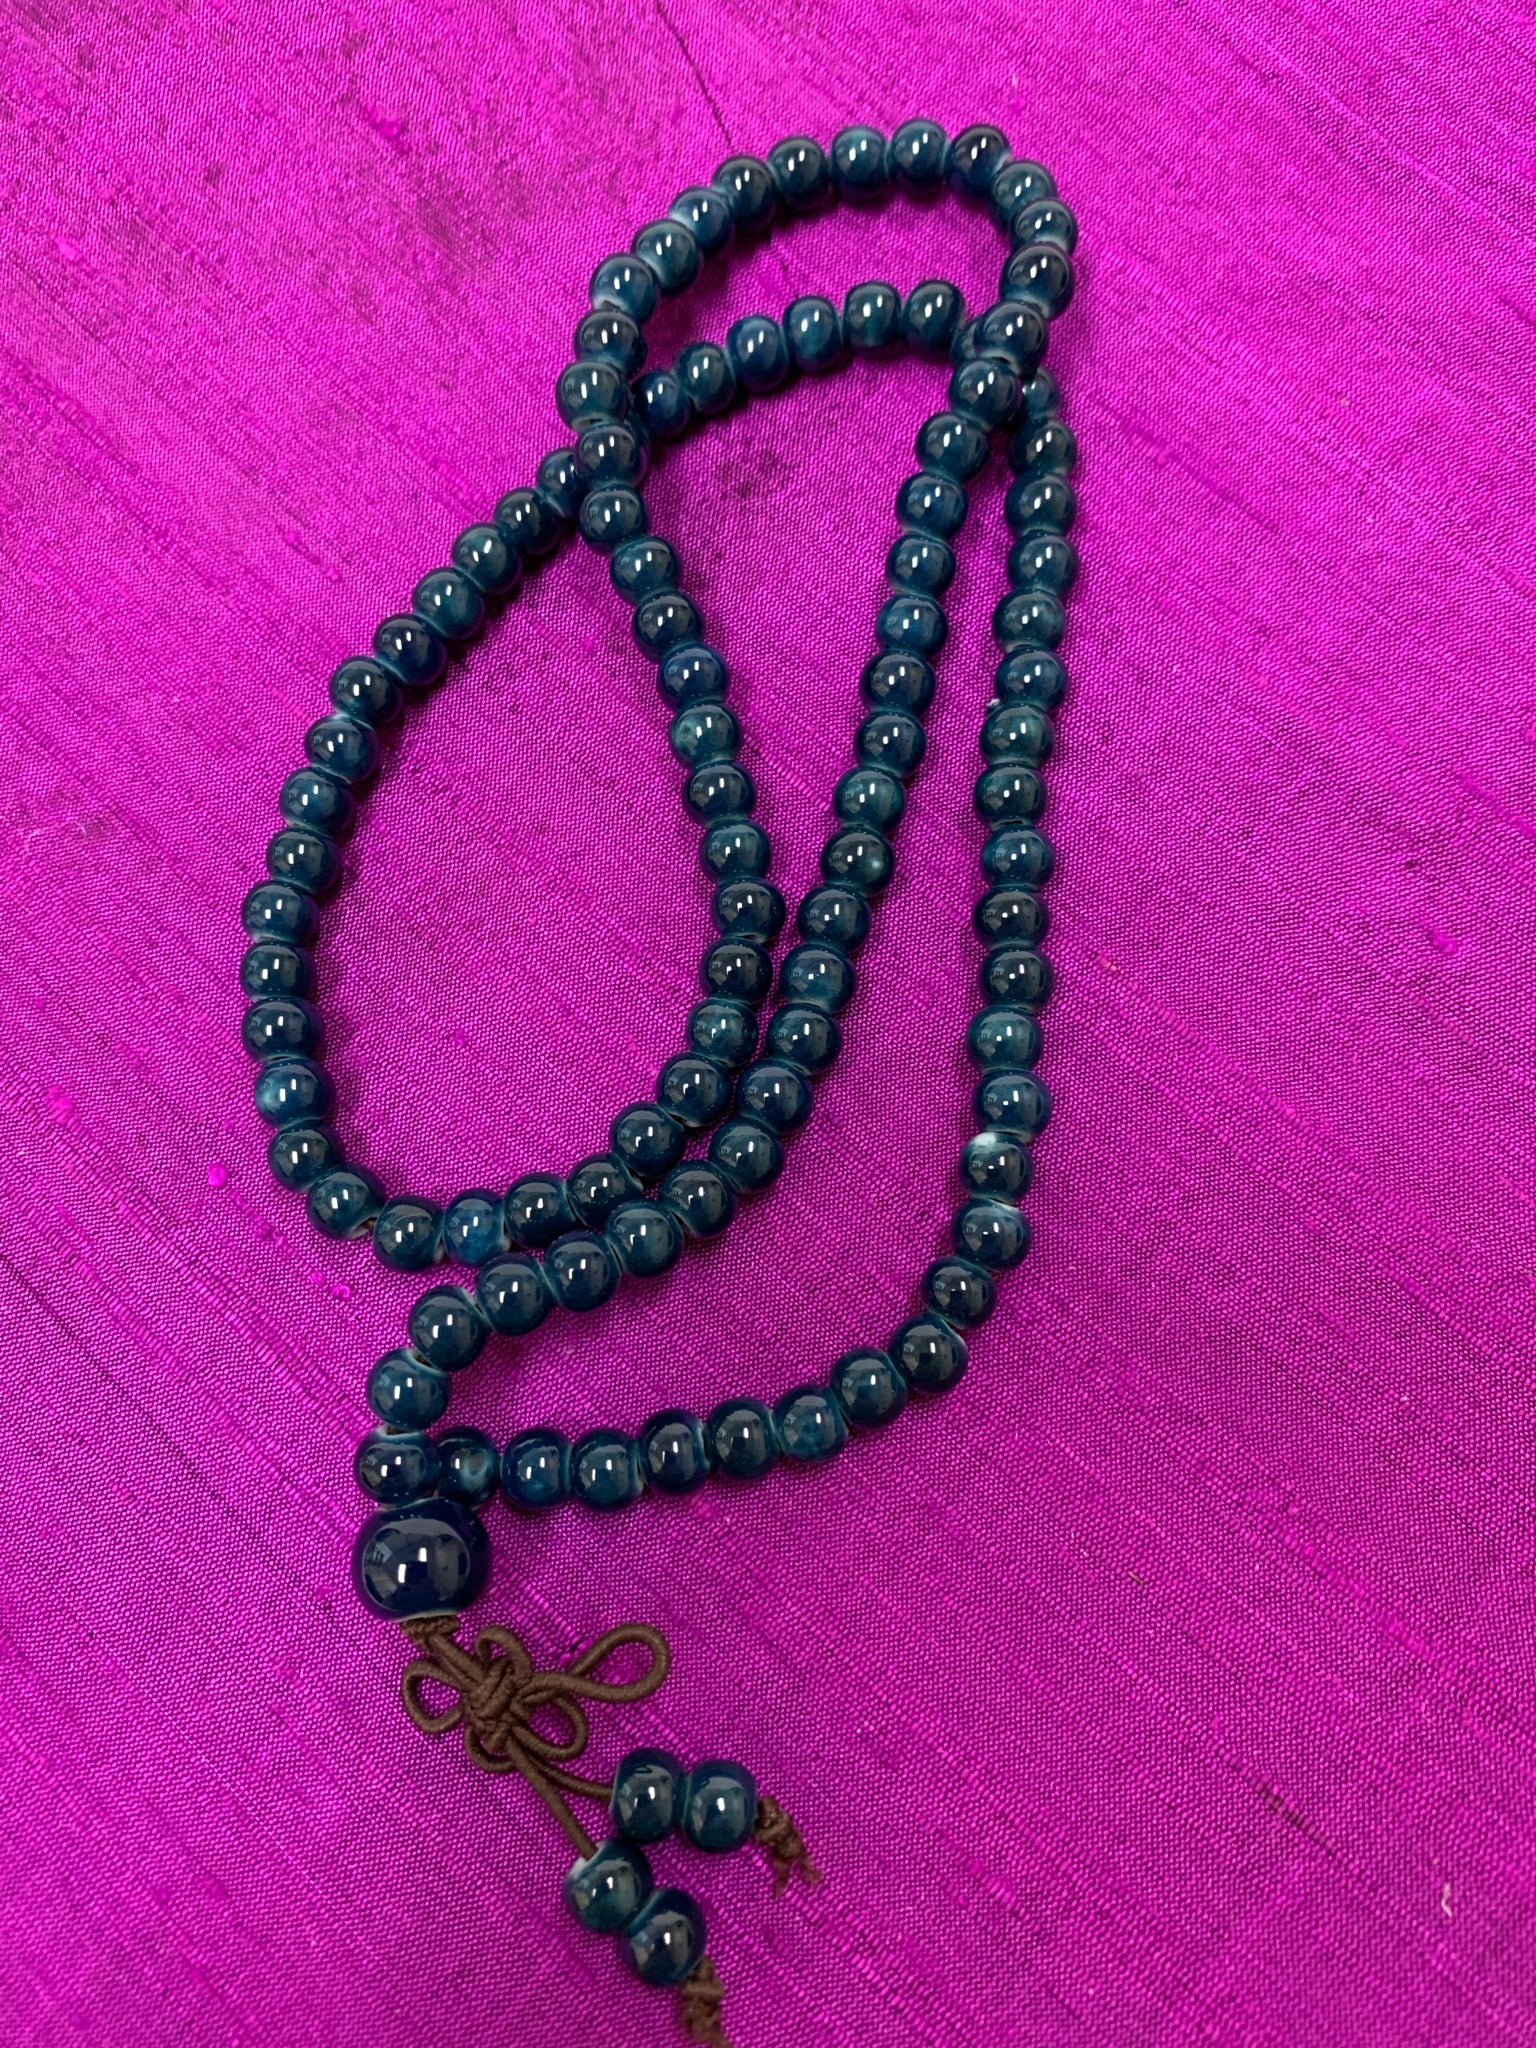 Close-up view. Prayer beads/mala necklace consists of 108 small, blue ceramic beads. Used to count 108 repetitions of a mantra, so the user can pay attention to the sounds, vibrations and meaning of the mantra being chanted.